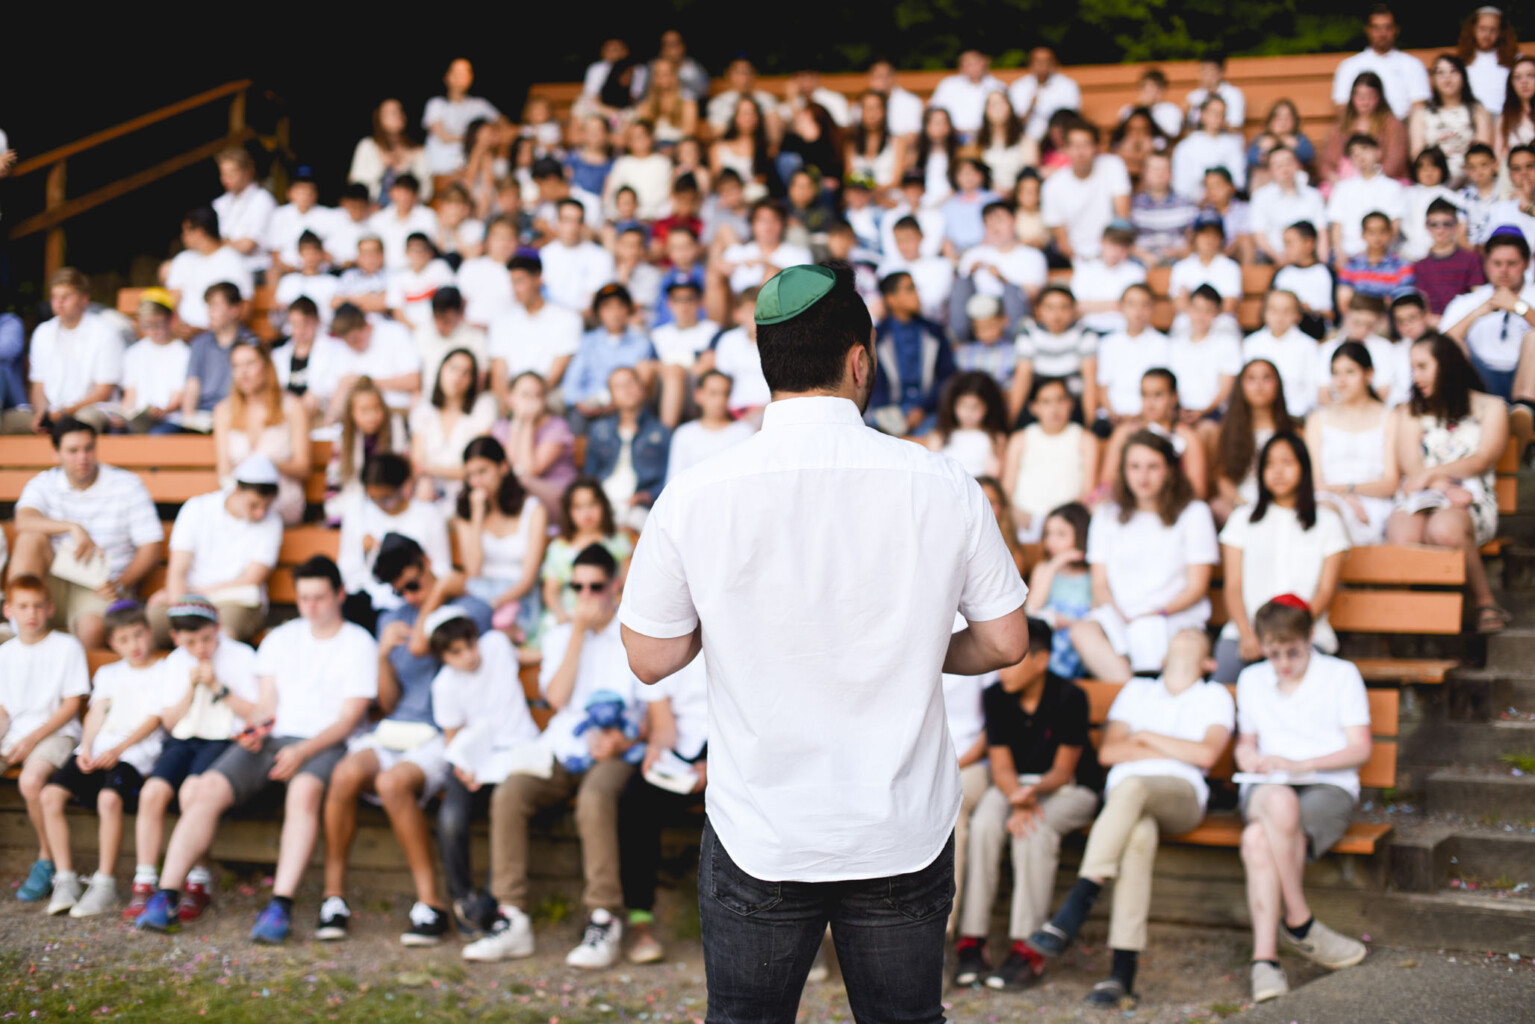 man in white facing an audience of kids in white.